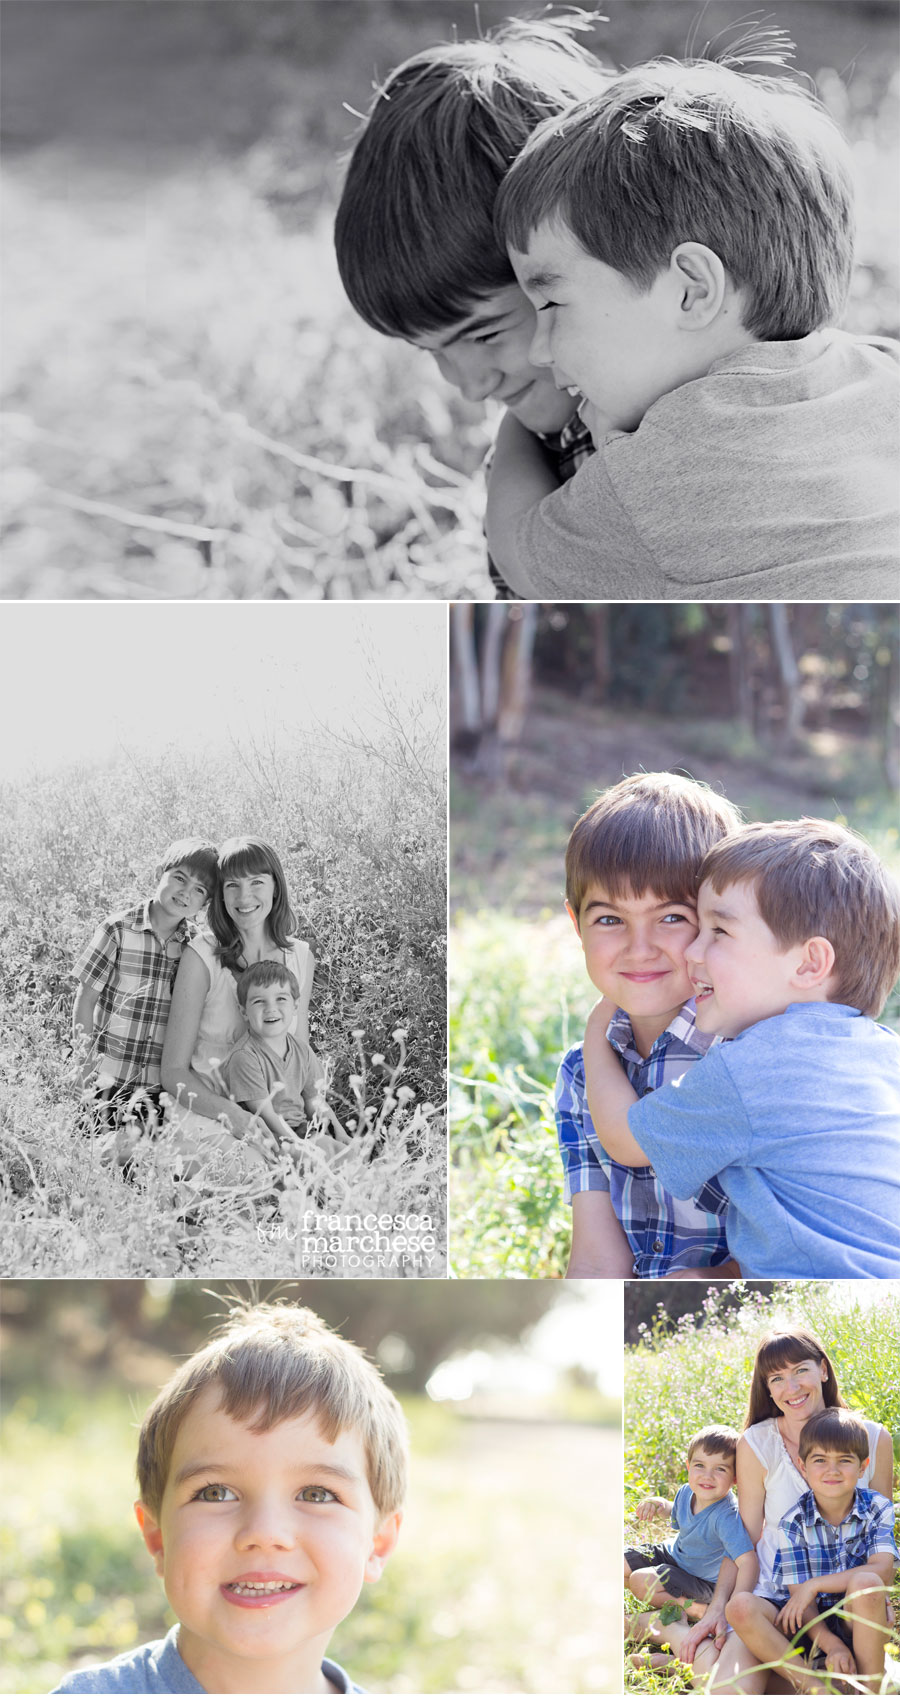 Brothers - Francesca Marchese Photography Orange County Family Photographer